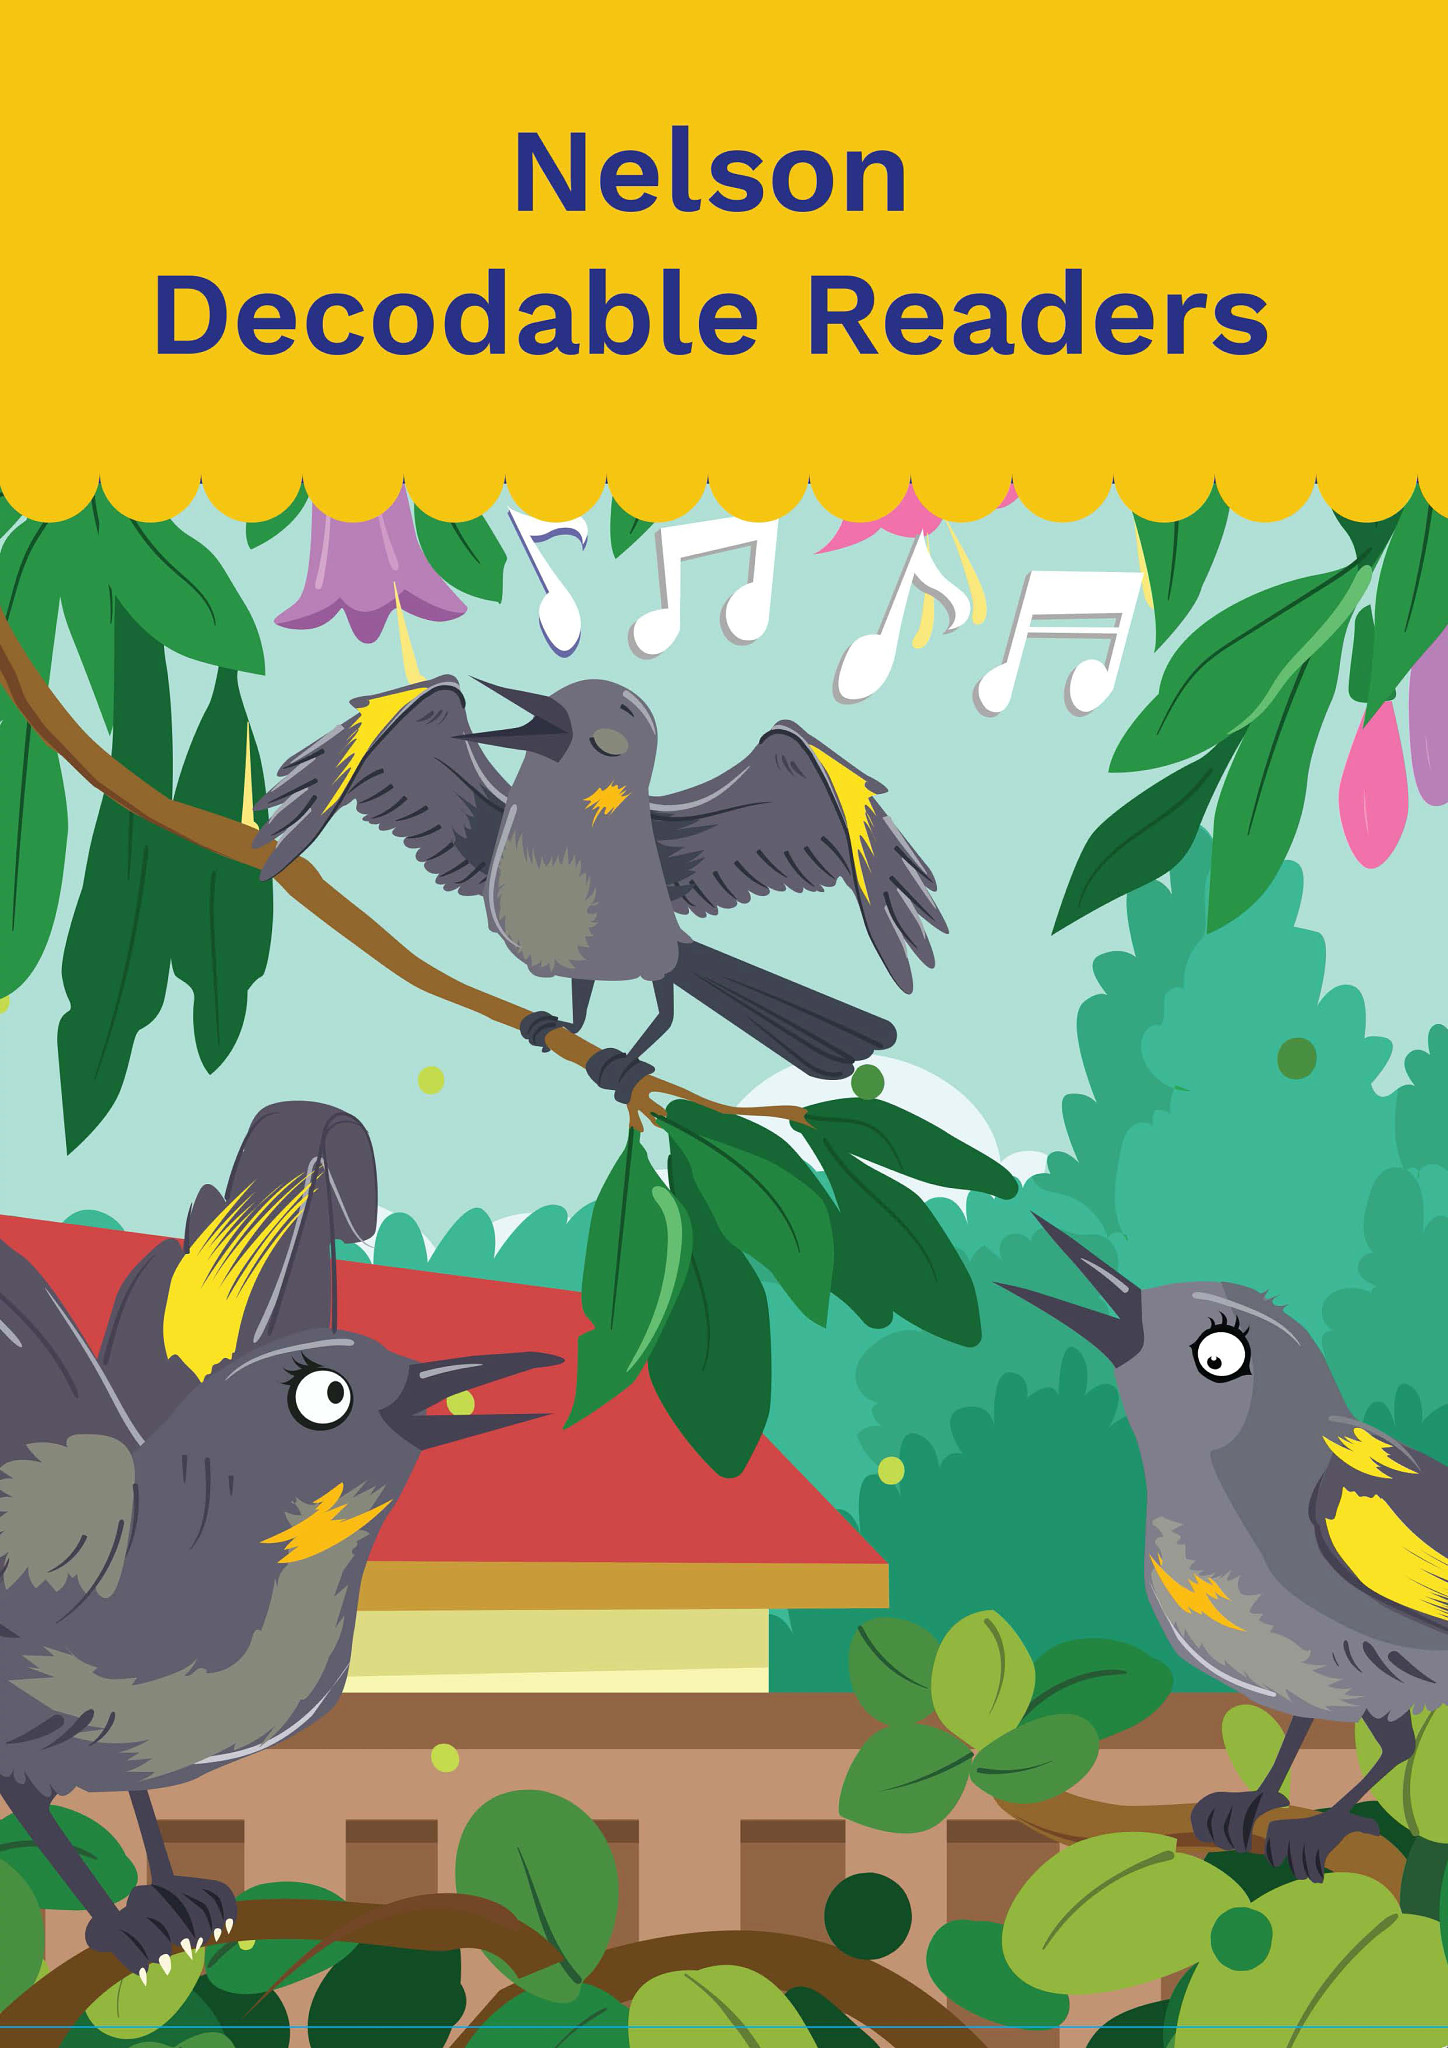 Nelson Decodable Readers Poster